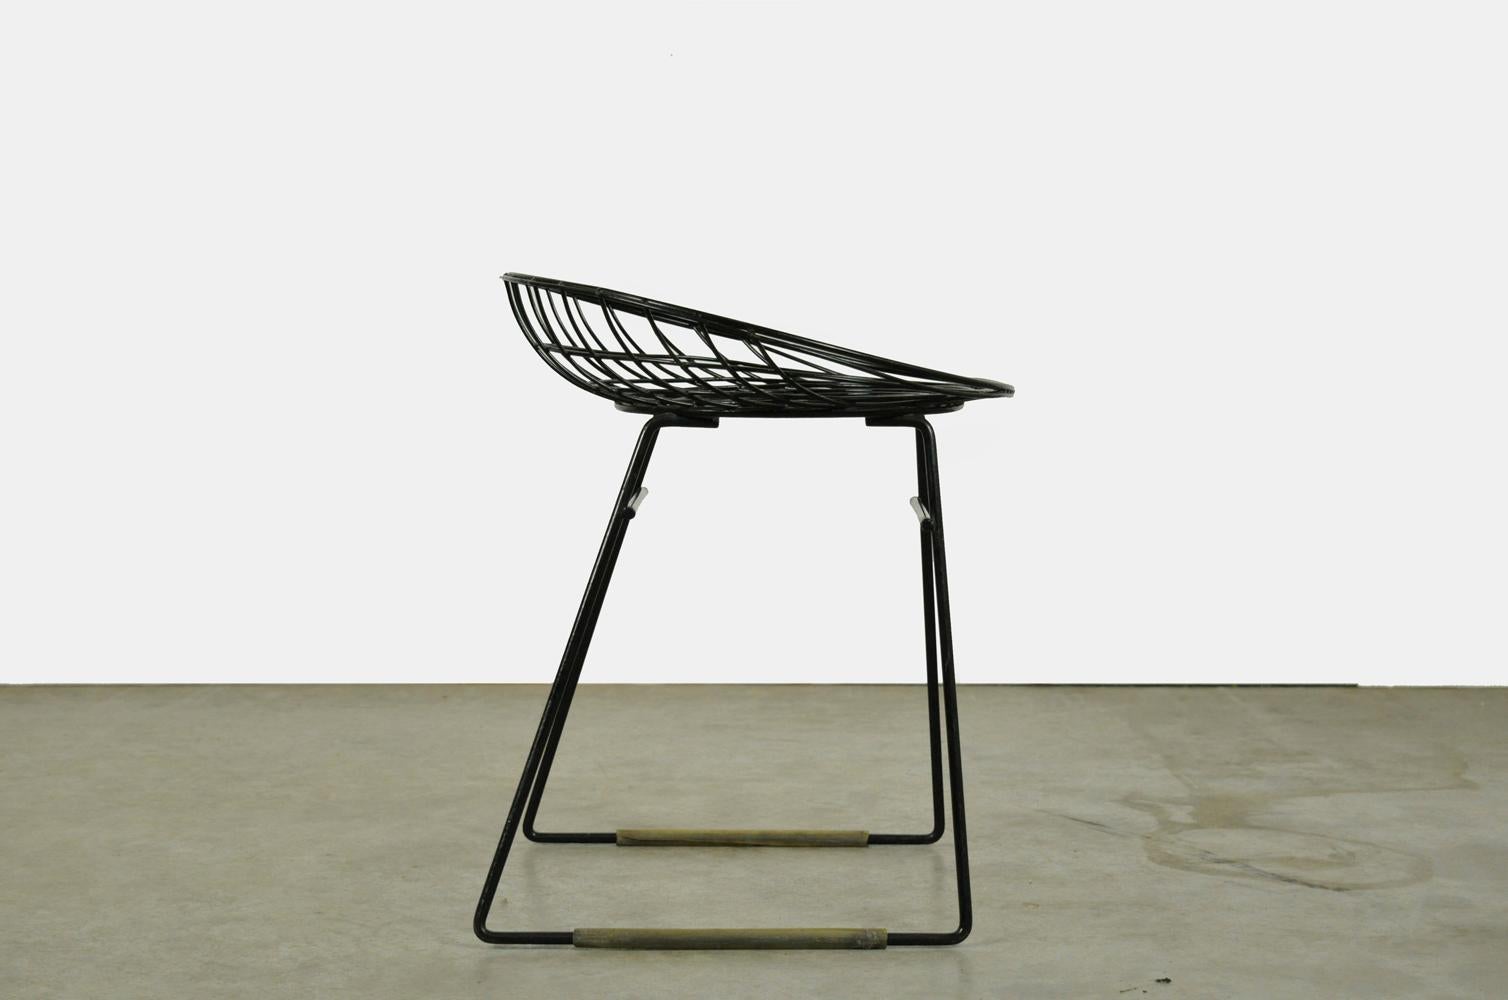 Metal wire stool KM05 designed by Cees Braakman and Adriaan Dekker for Pastoe, 1950s. The metal wires have a black plastic coating. The wire stool was designed in collaboration with Tomado in the 1950s. Original version with lower seat height. Two